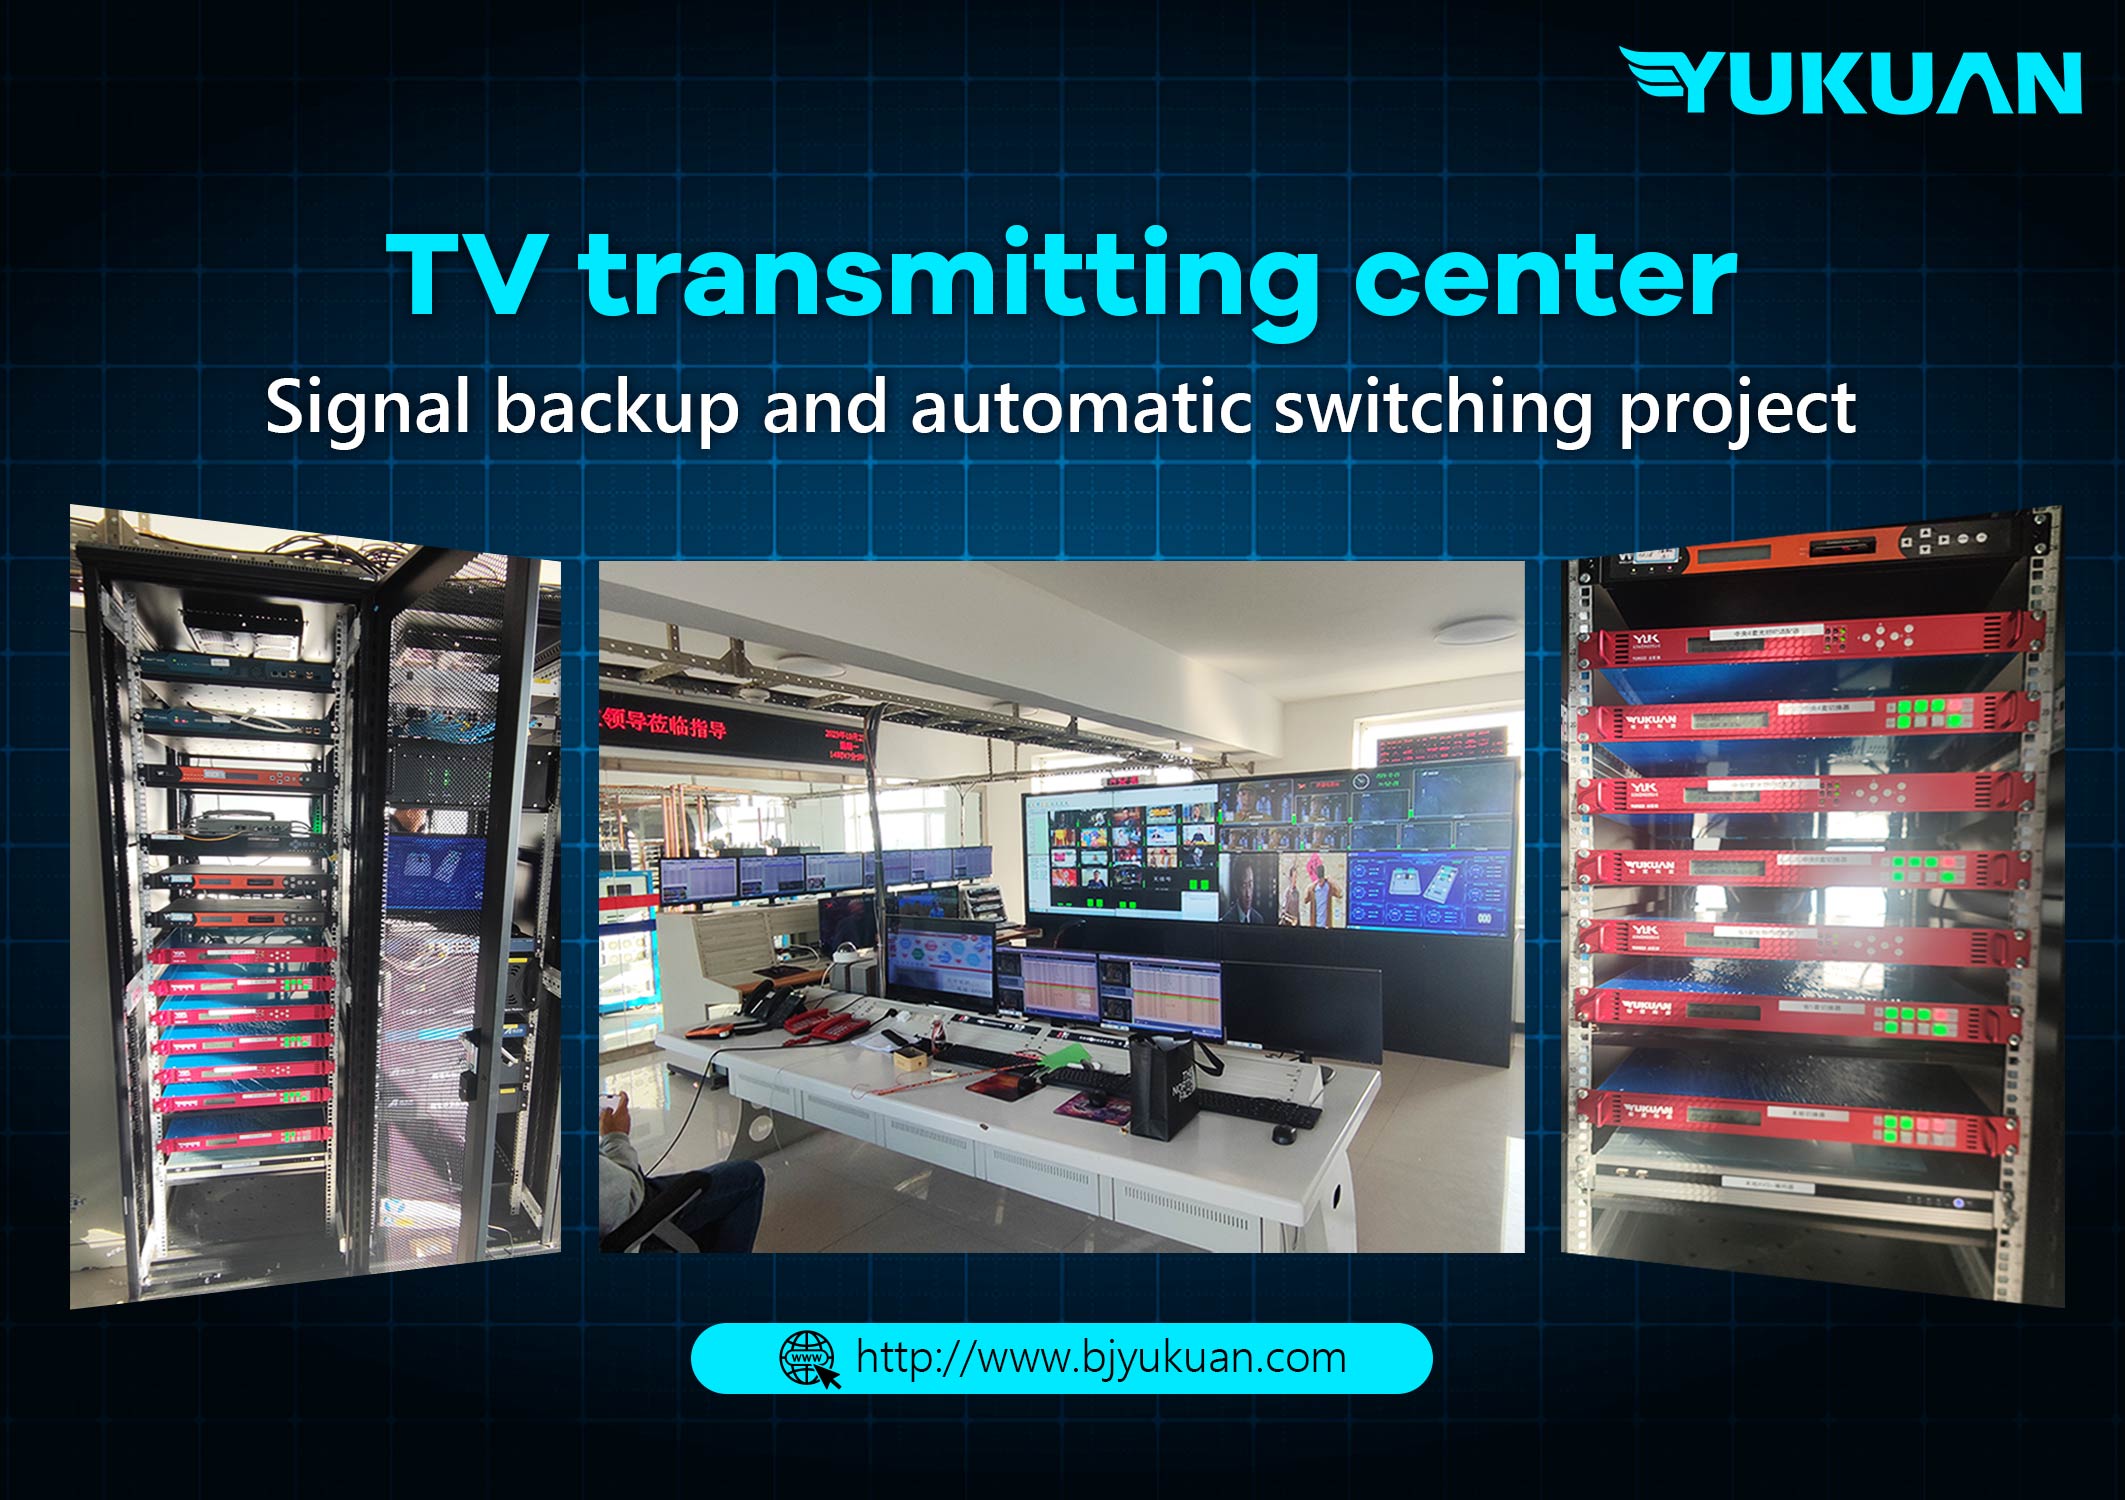 Signal backup and automatic switching project for TV transmitting center